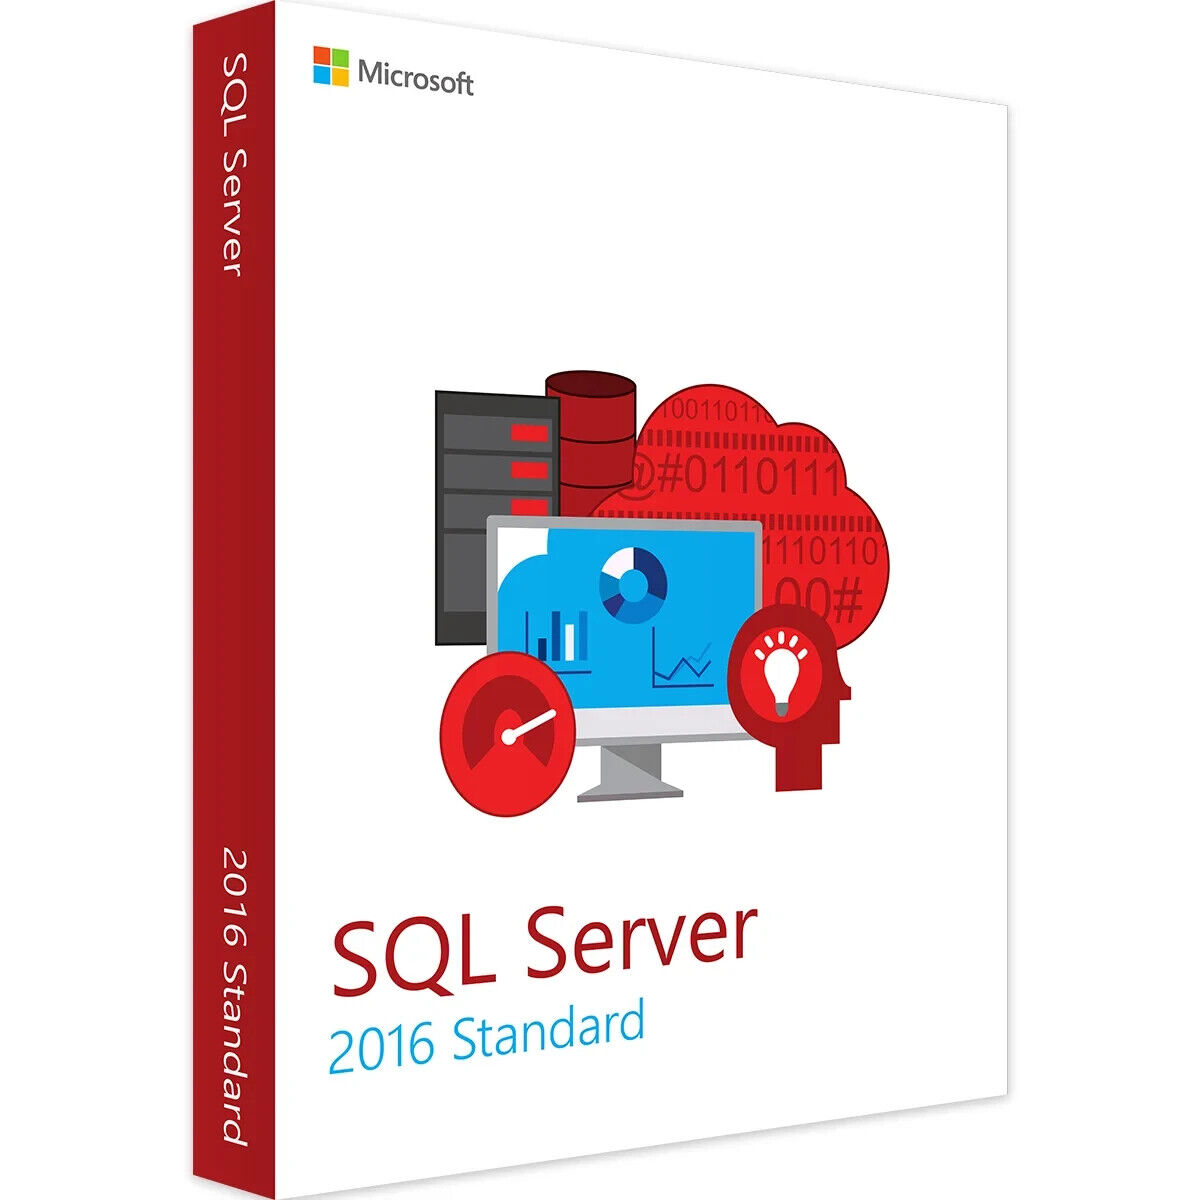 Microsoft SQL Server 2016 Standard with 4 Core License, unlimited User CALs